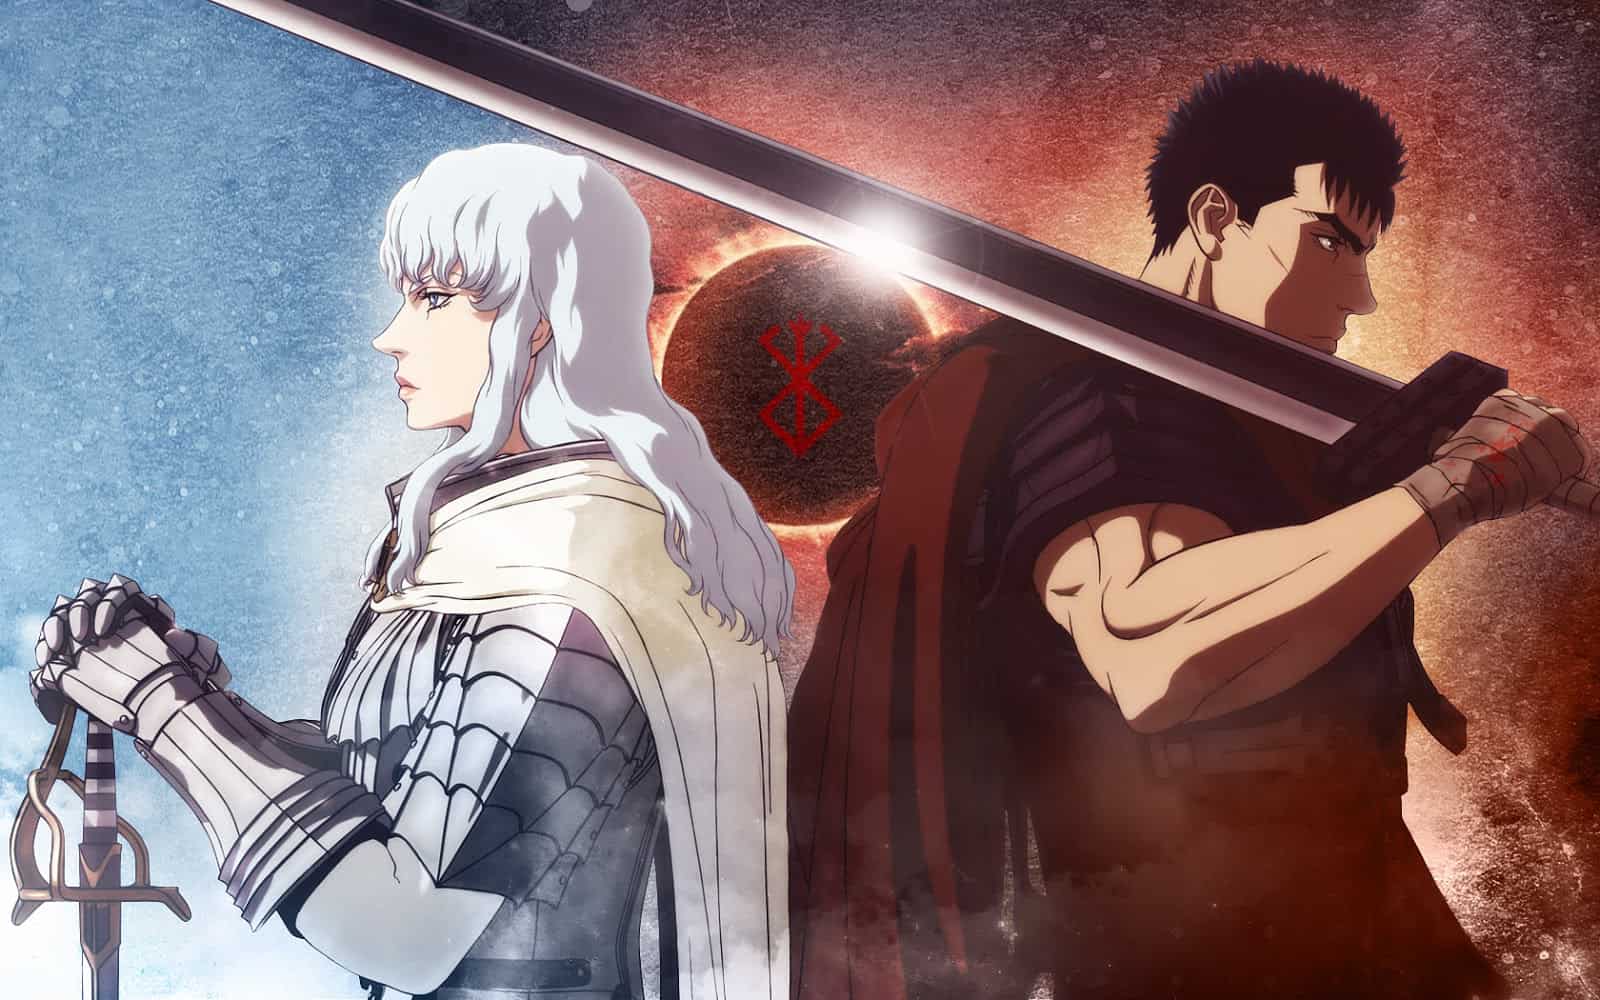 From left: Griffith and Guts